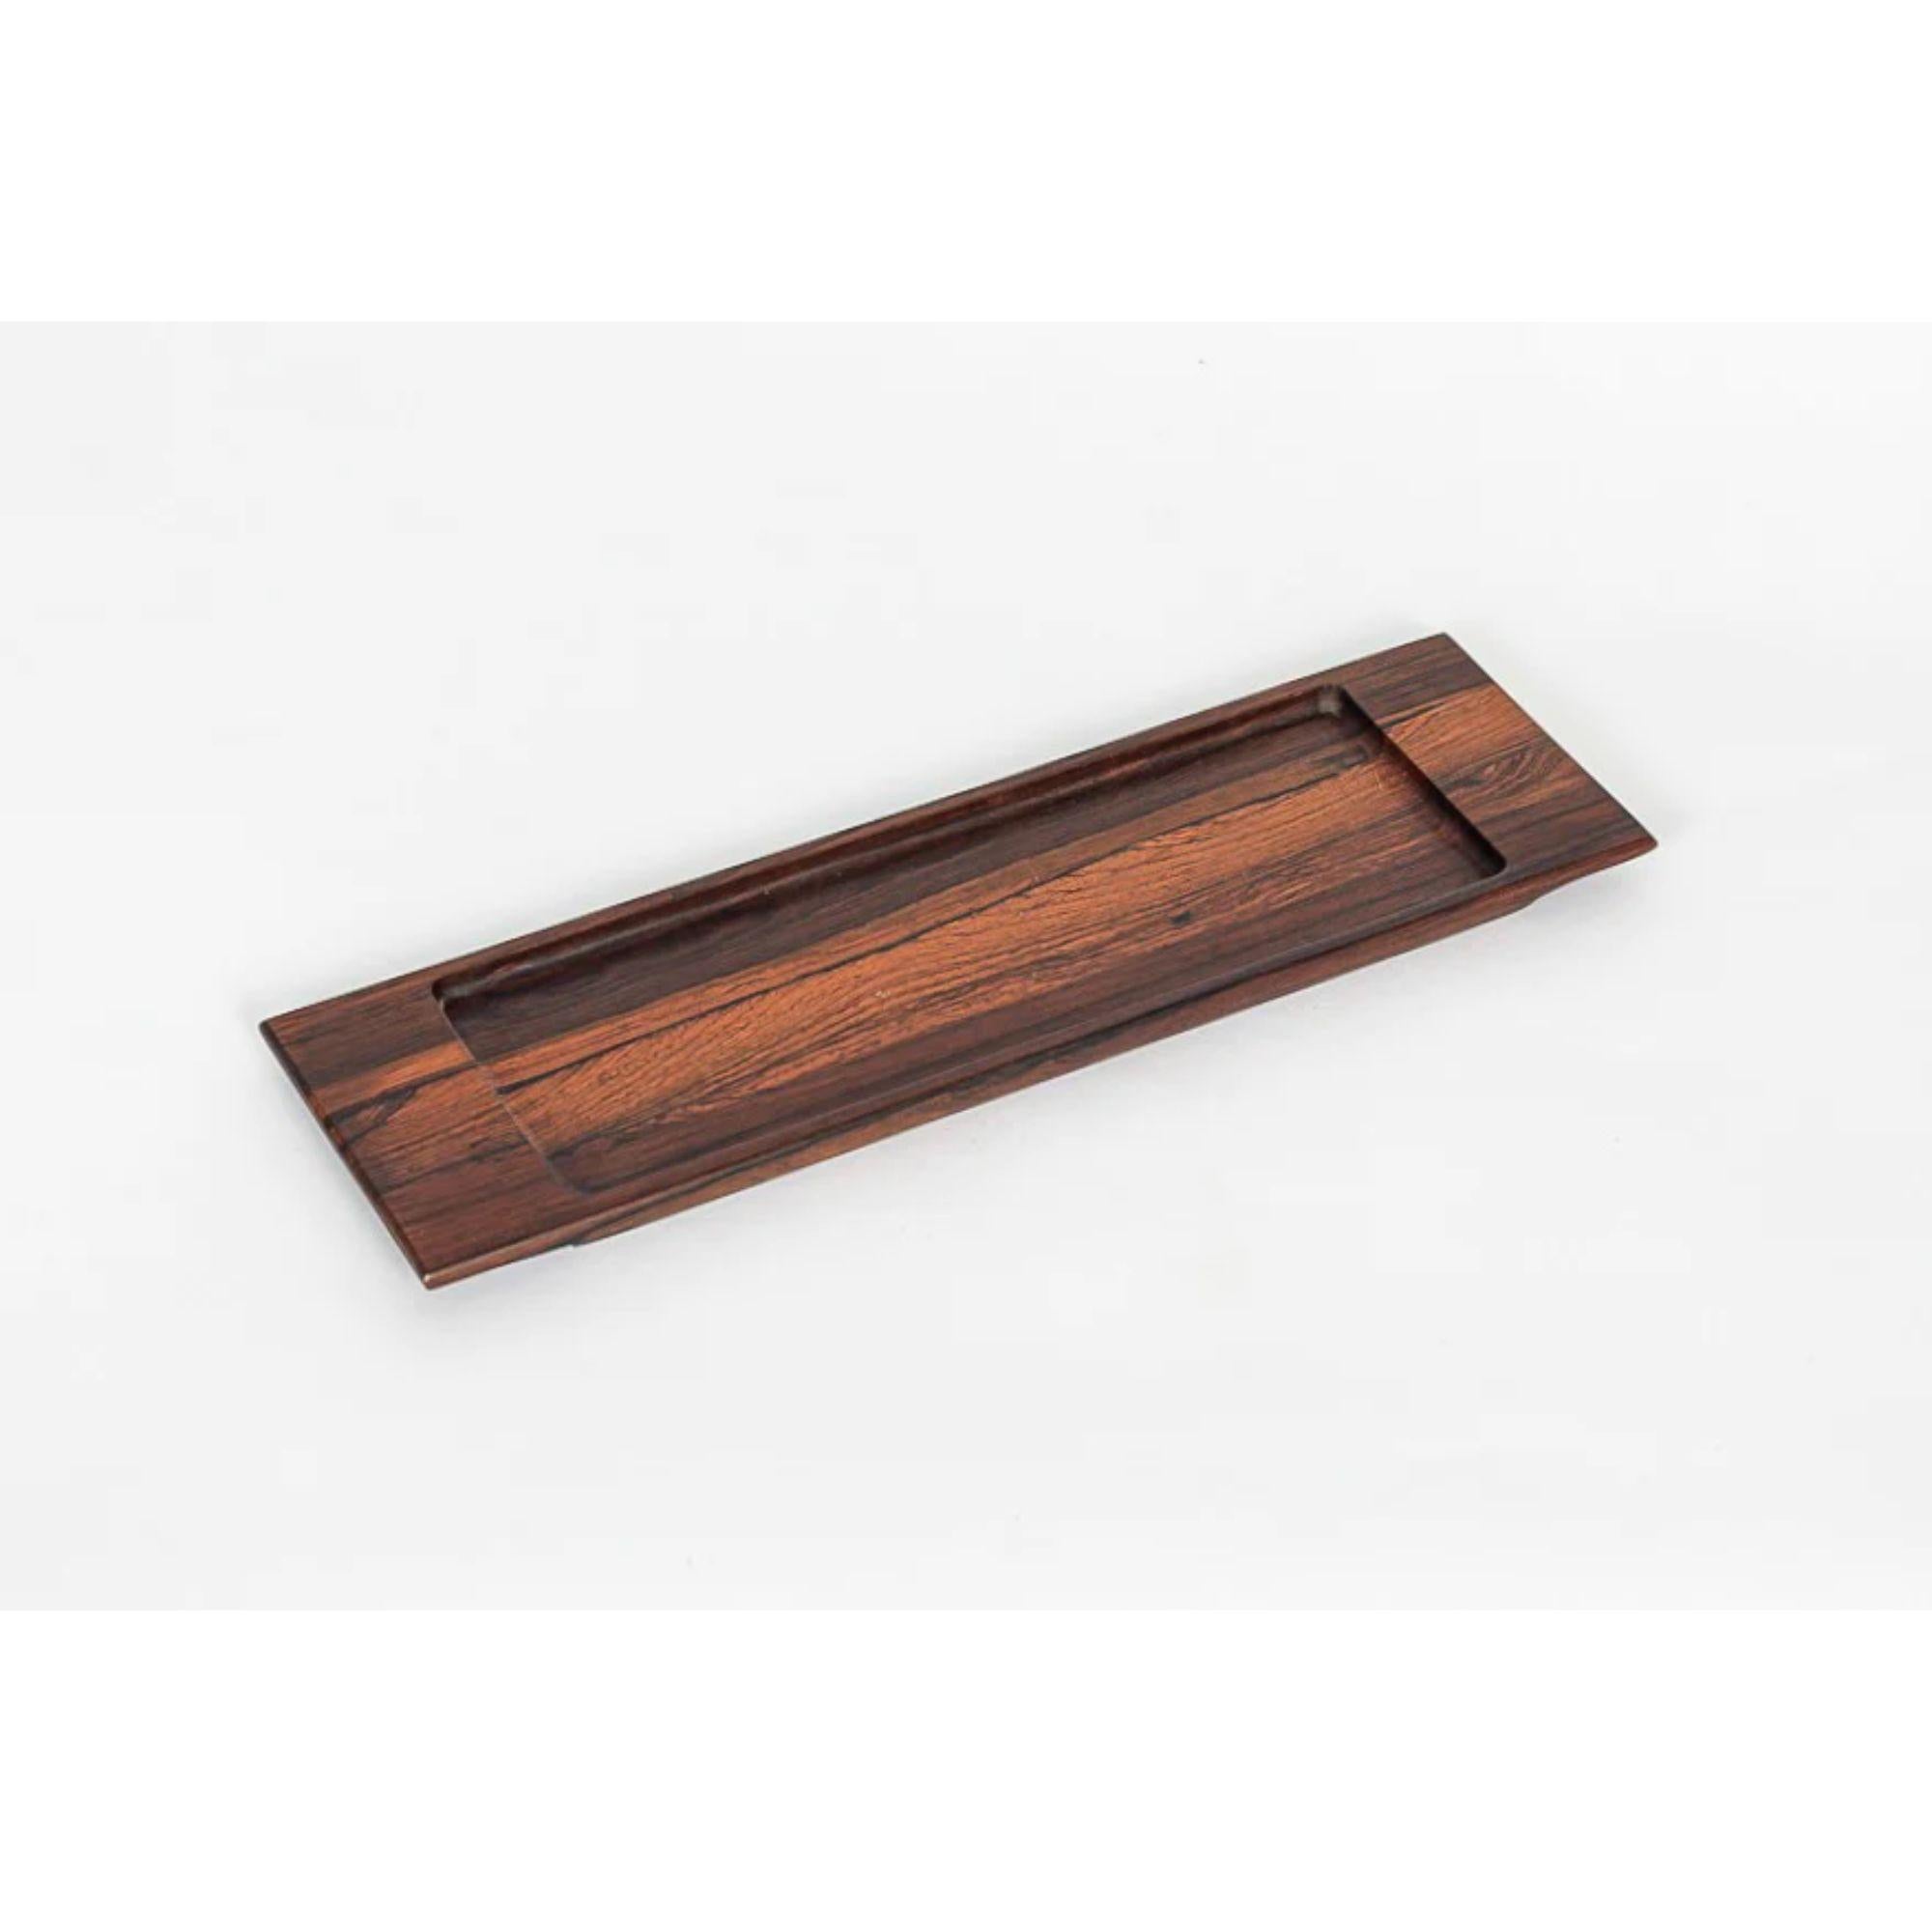 This midcentury Brazilian modern rosewood decorative tray was designed by Jean Gillon for WoodArt and made in Brazil circa 1960. Impeccably handcrafted from hard Jacaranda rosewood native to Brazil, a signature material of Gillon design, this tray